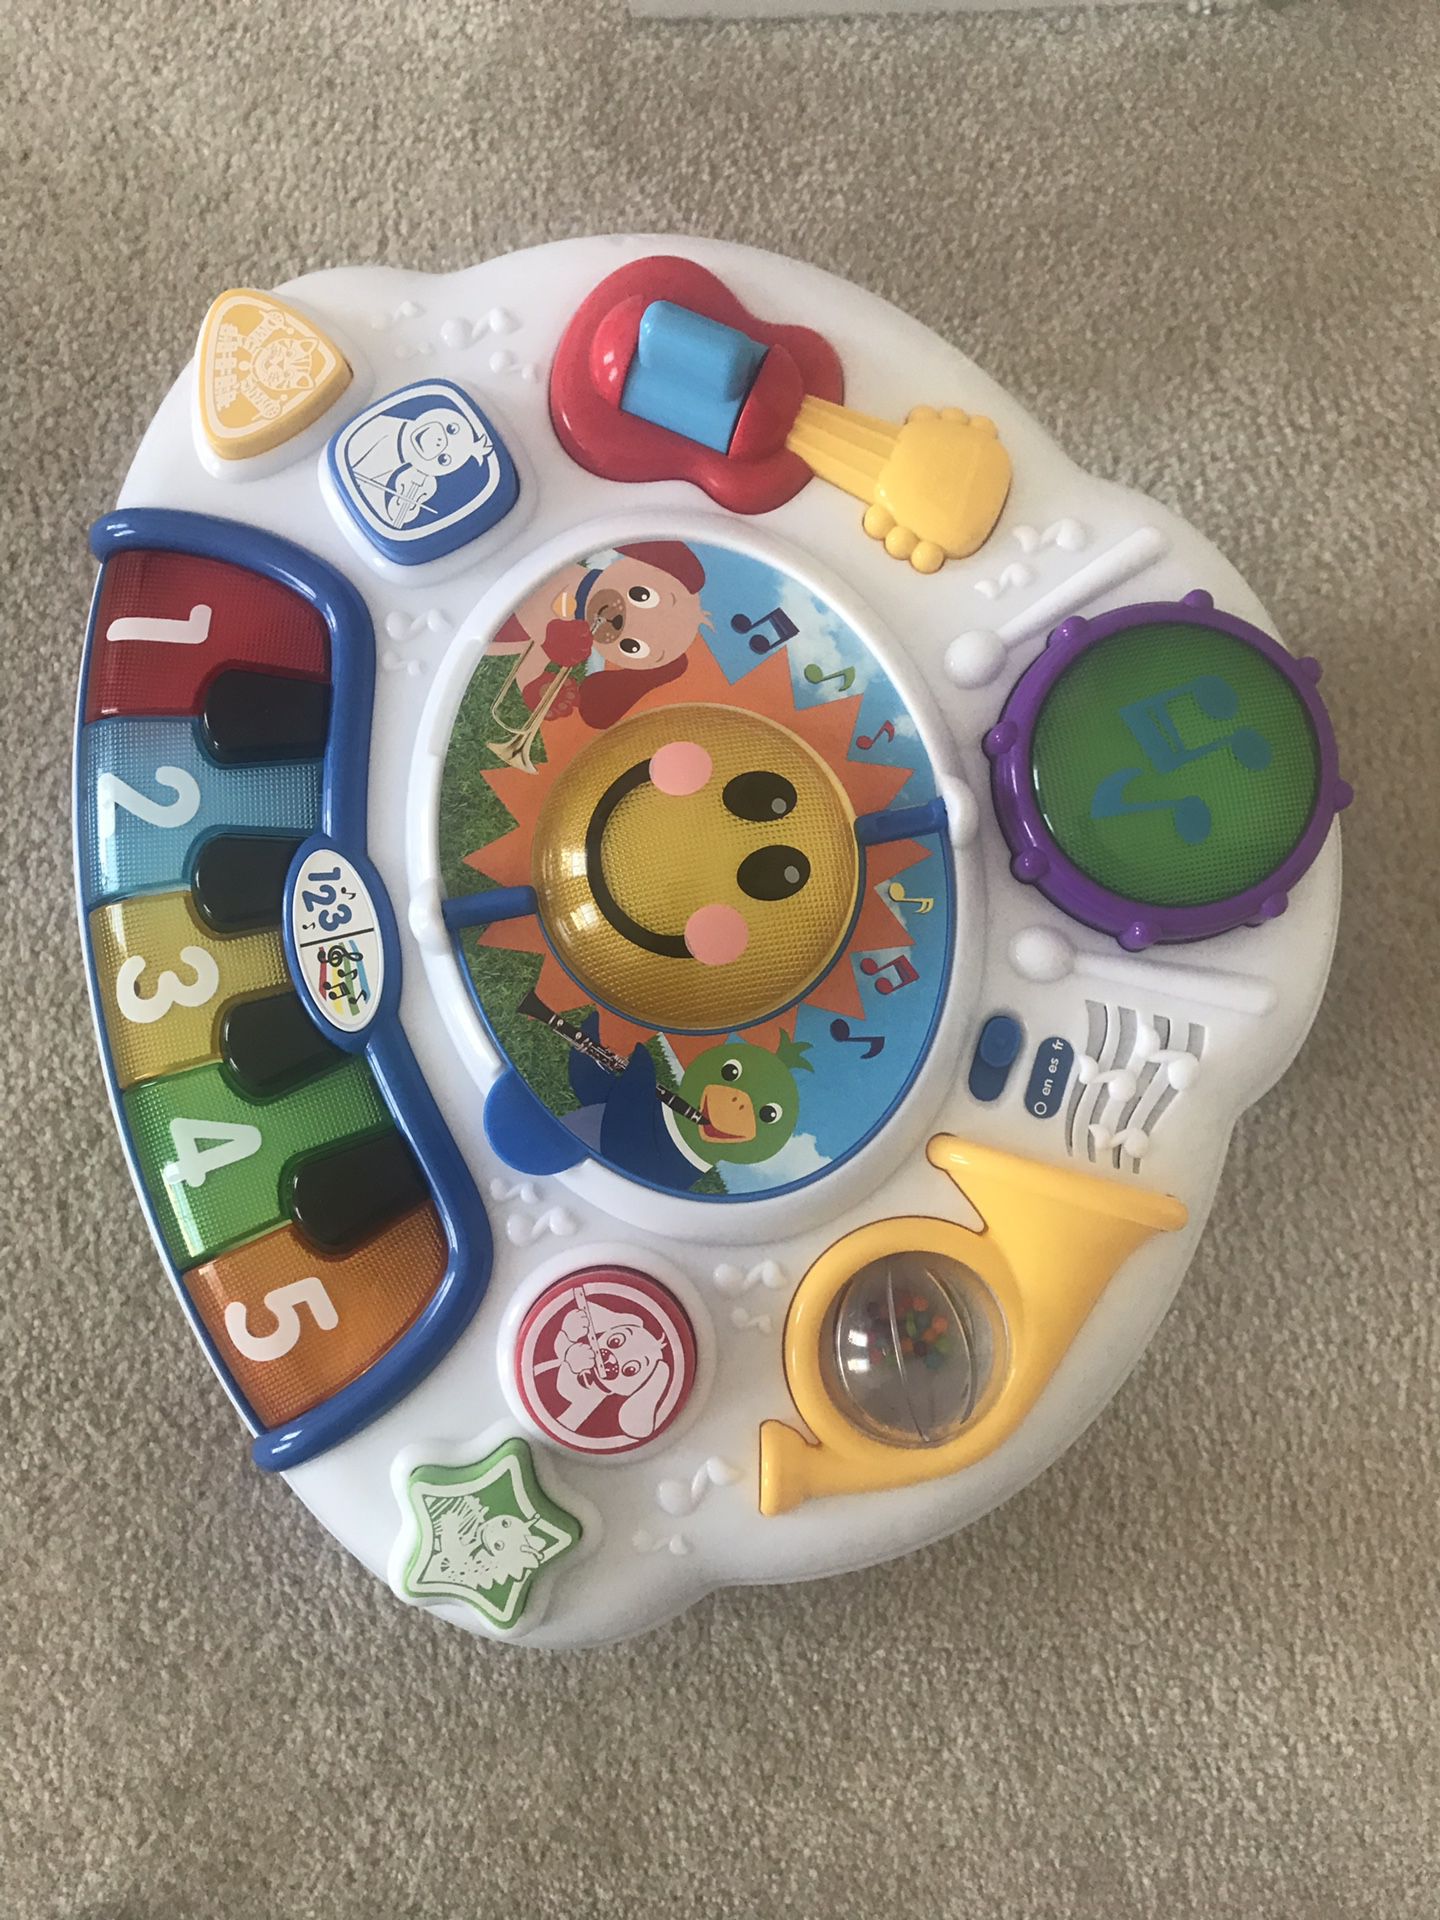 Toy Play Table